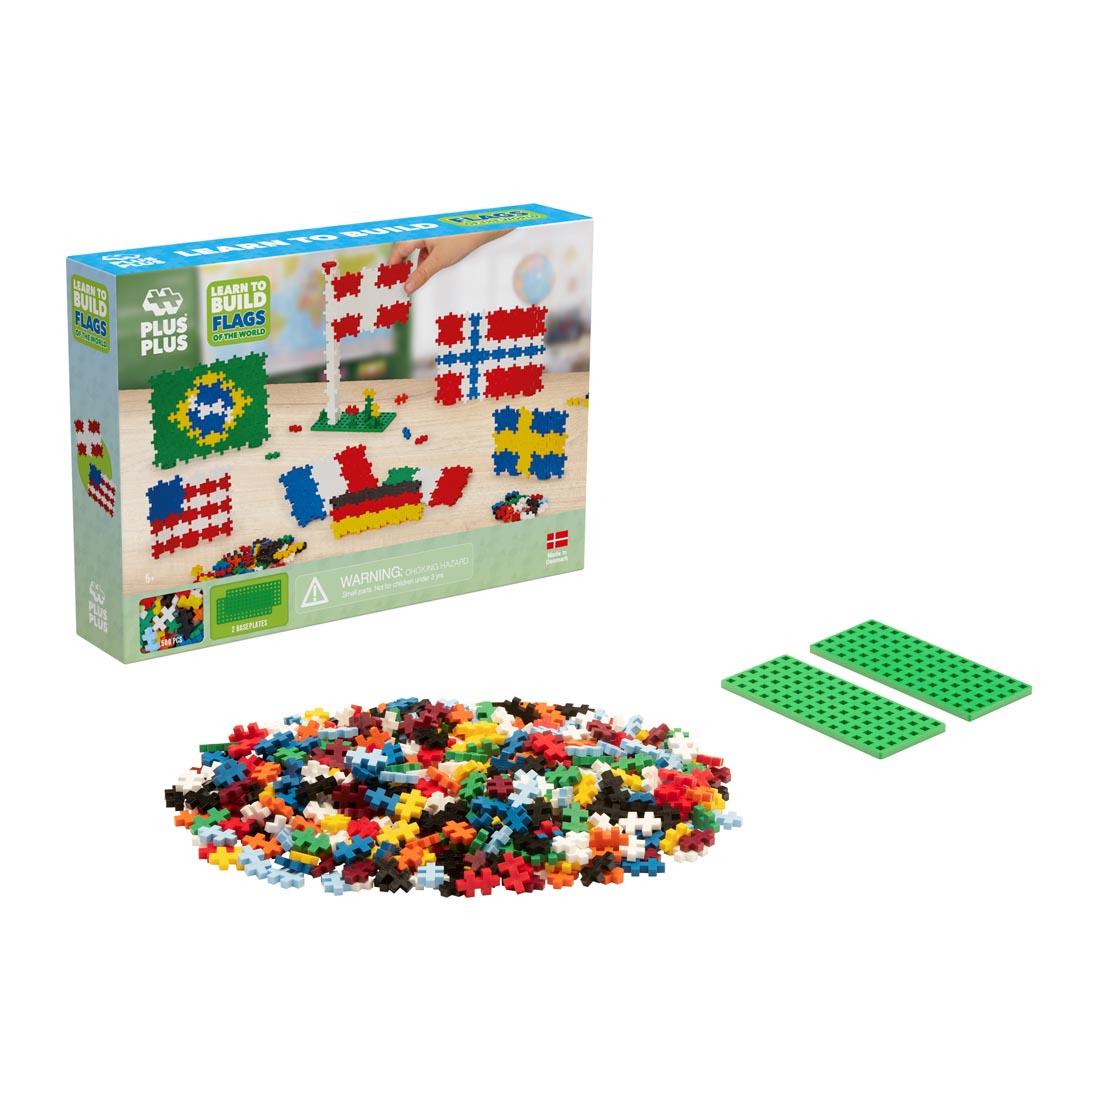 box for Plus-Plus Learn To Build Flags Of The World Set behind pile of pieces and base plates